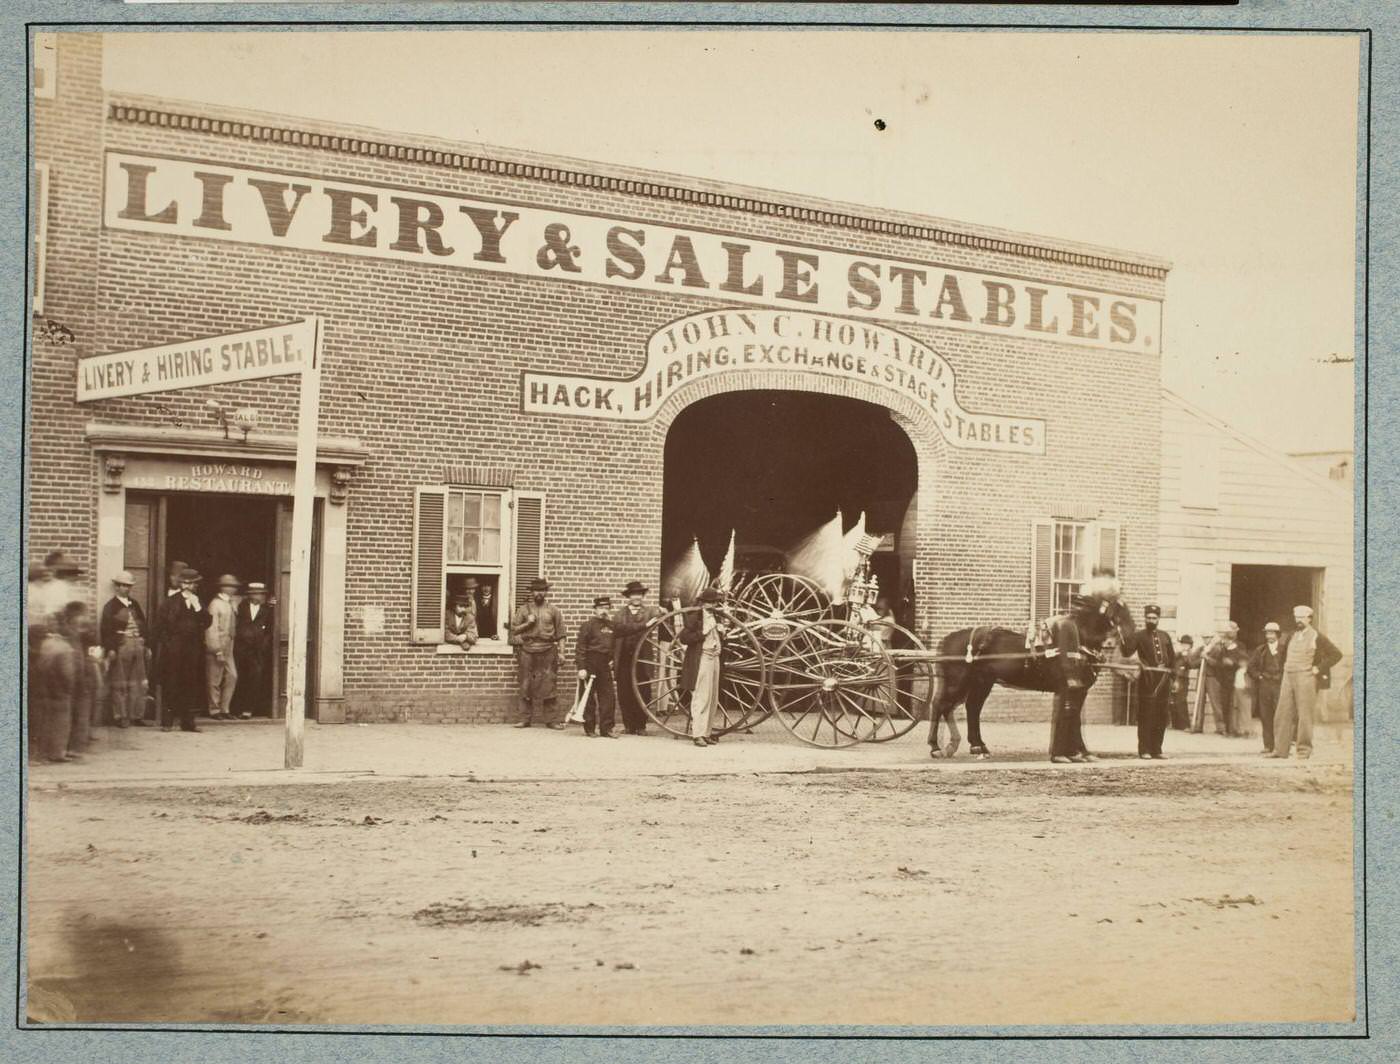 Exterior view of Howard's Stable in Washington, D.C., 1865